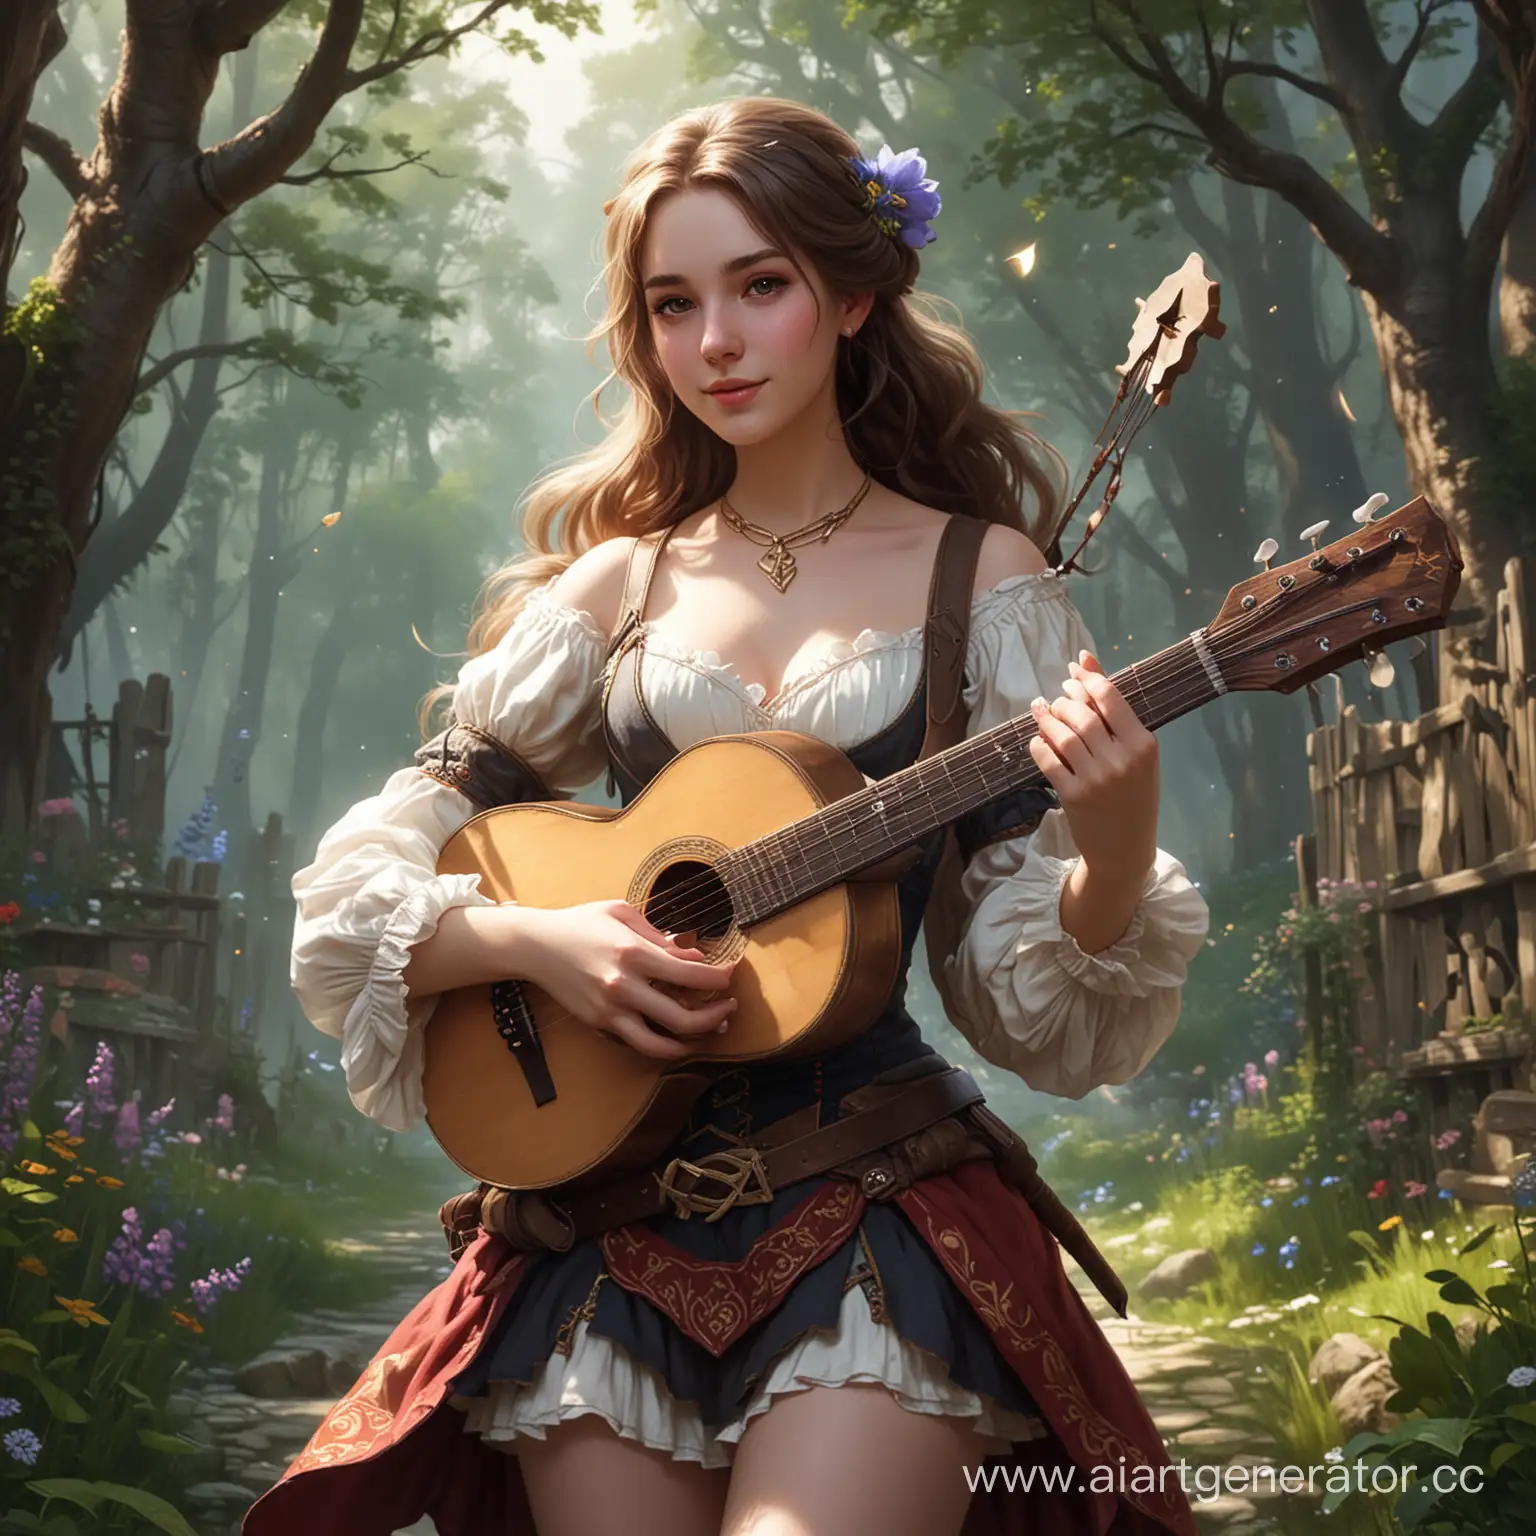 Enchanting-Bard-Girl-Playing-Music-in-Moonlit-Forest